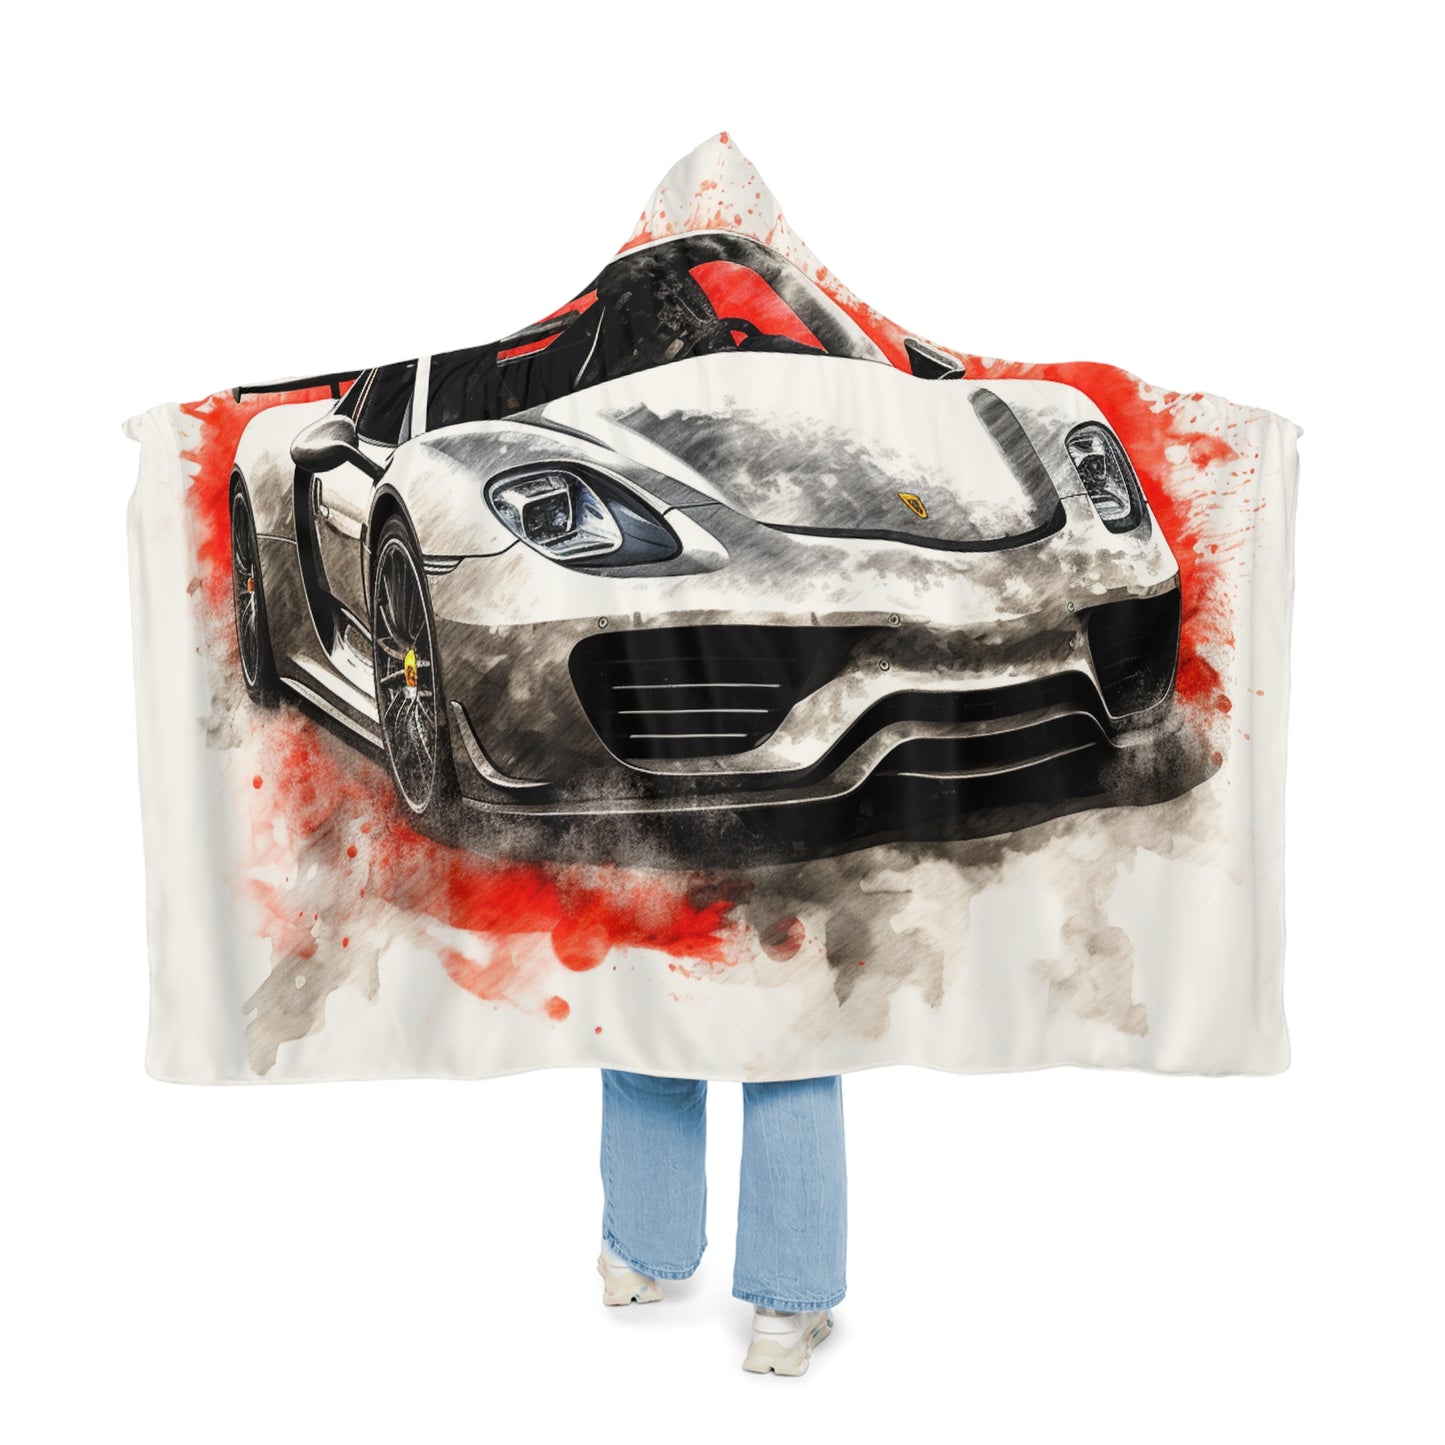 Snuggle Hooded Blanket 918 Spyder white background driving fast with water splashing 4